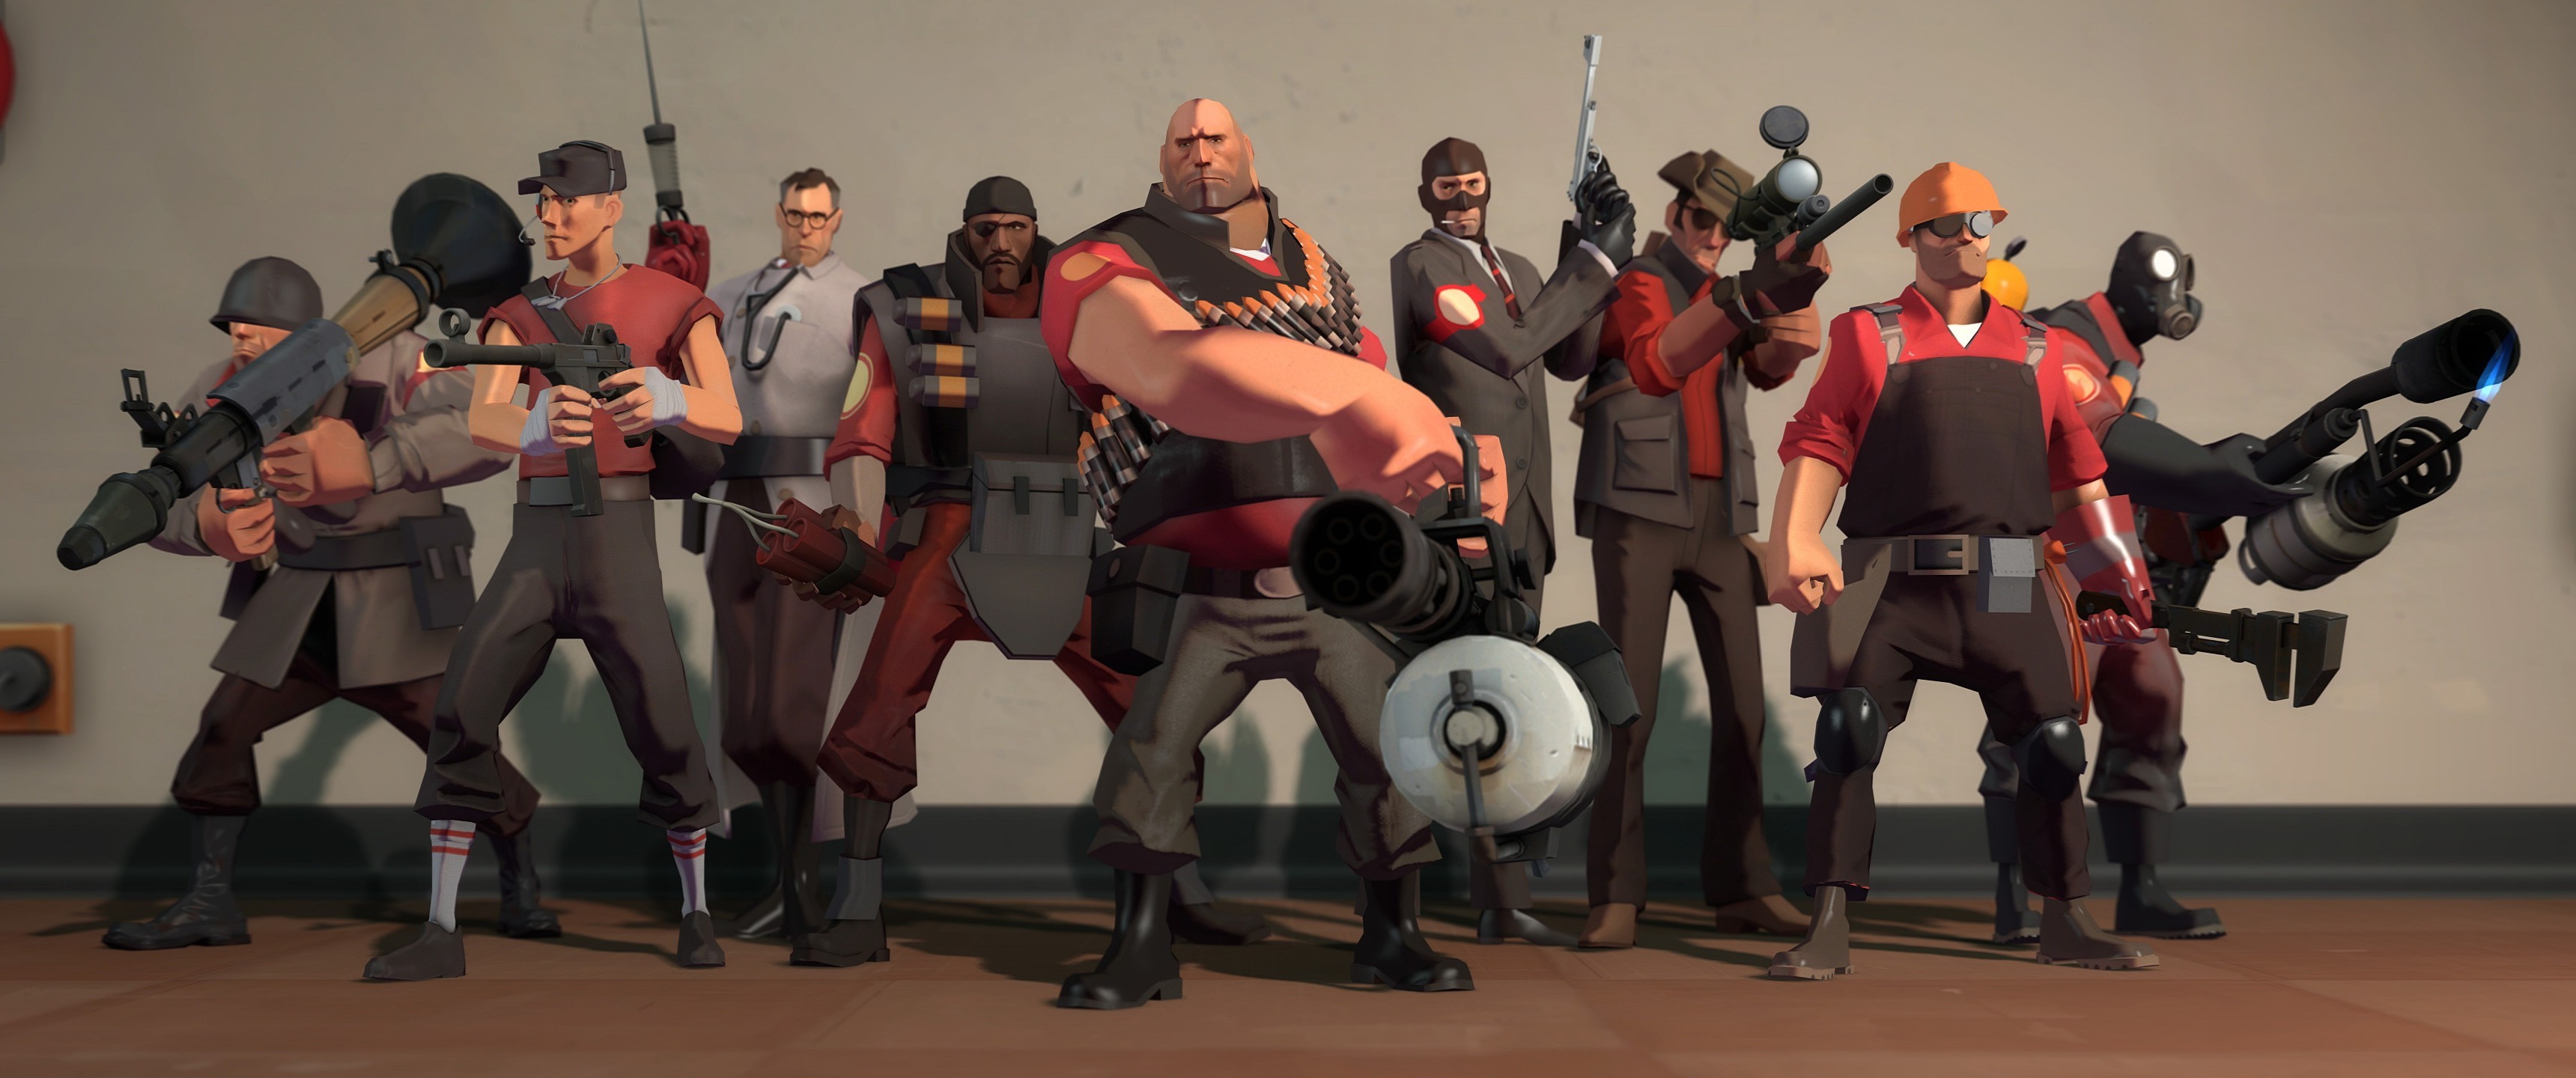 team fortress 2 classic download 2022 download